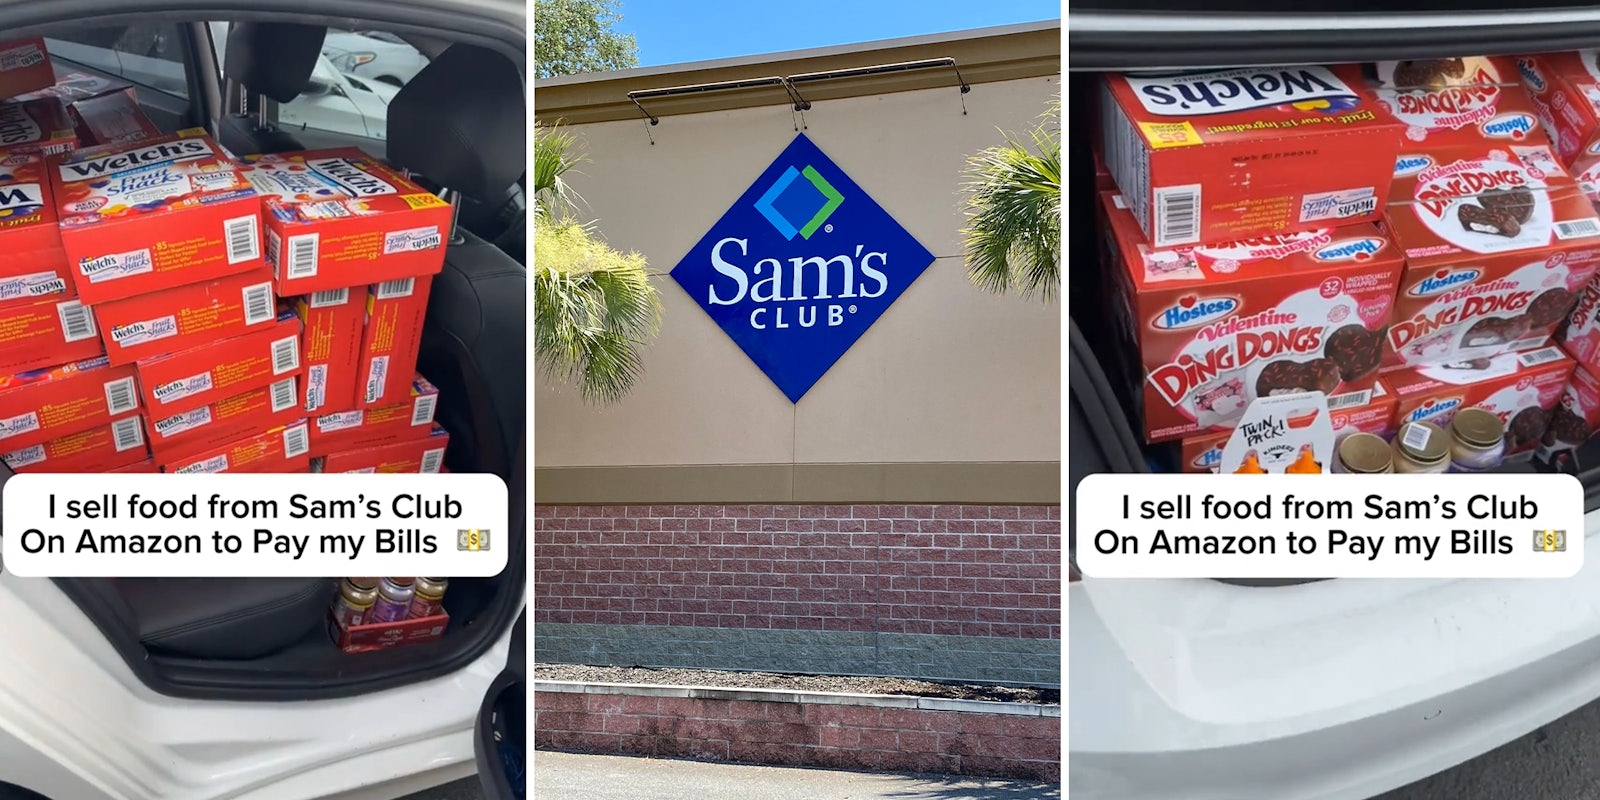 Woman says she pays her bills by reselling food from Sam’s Club